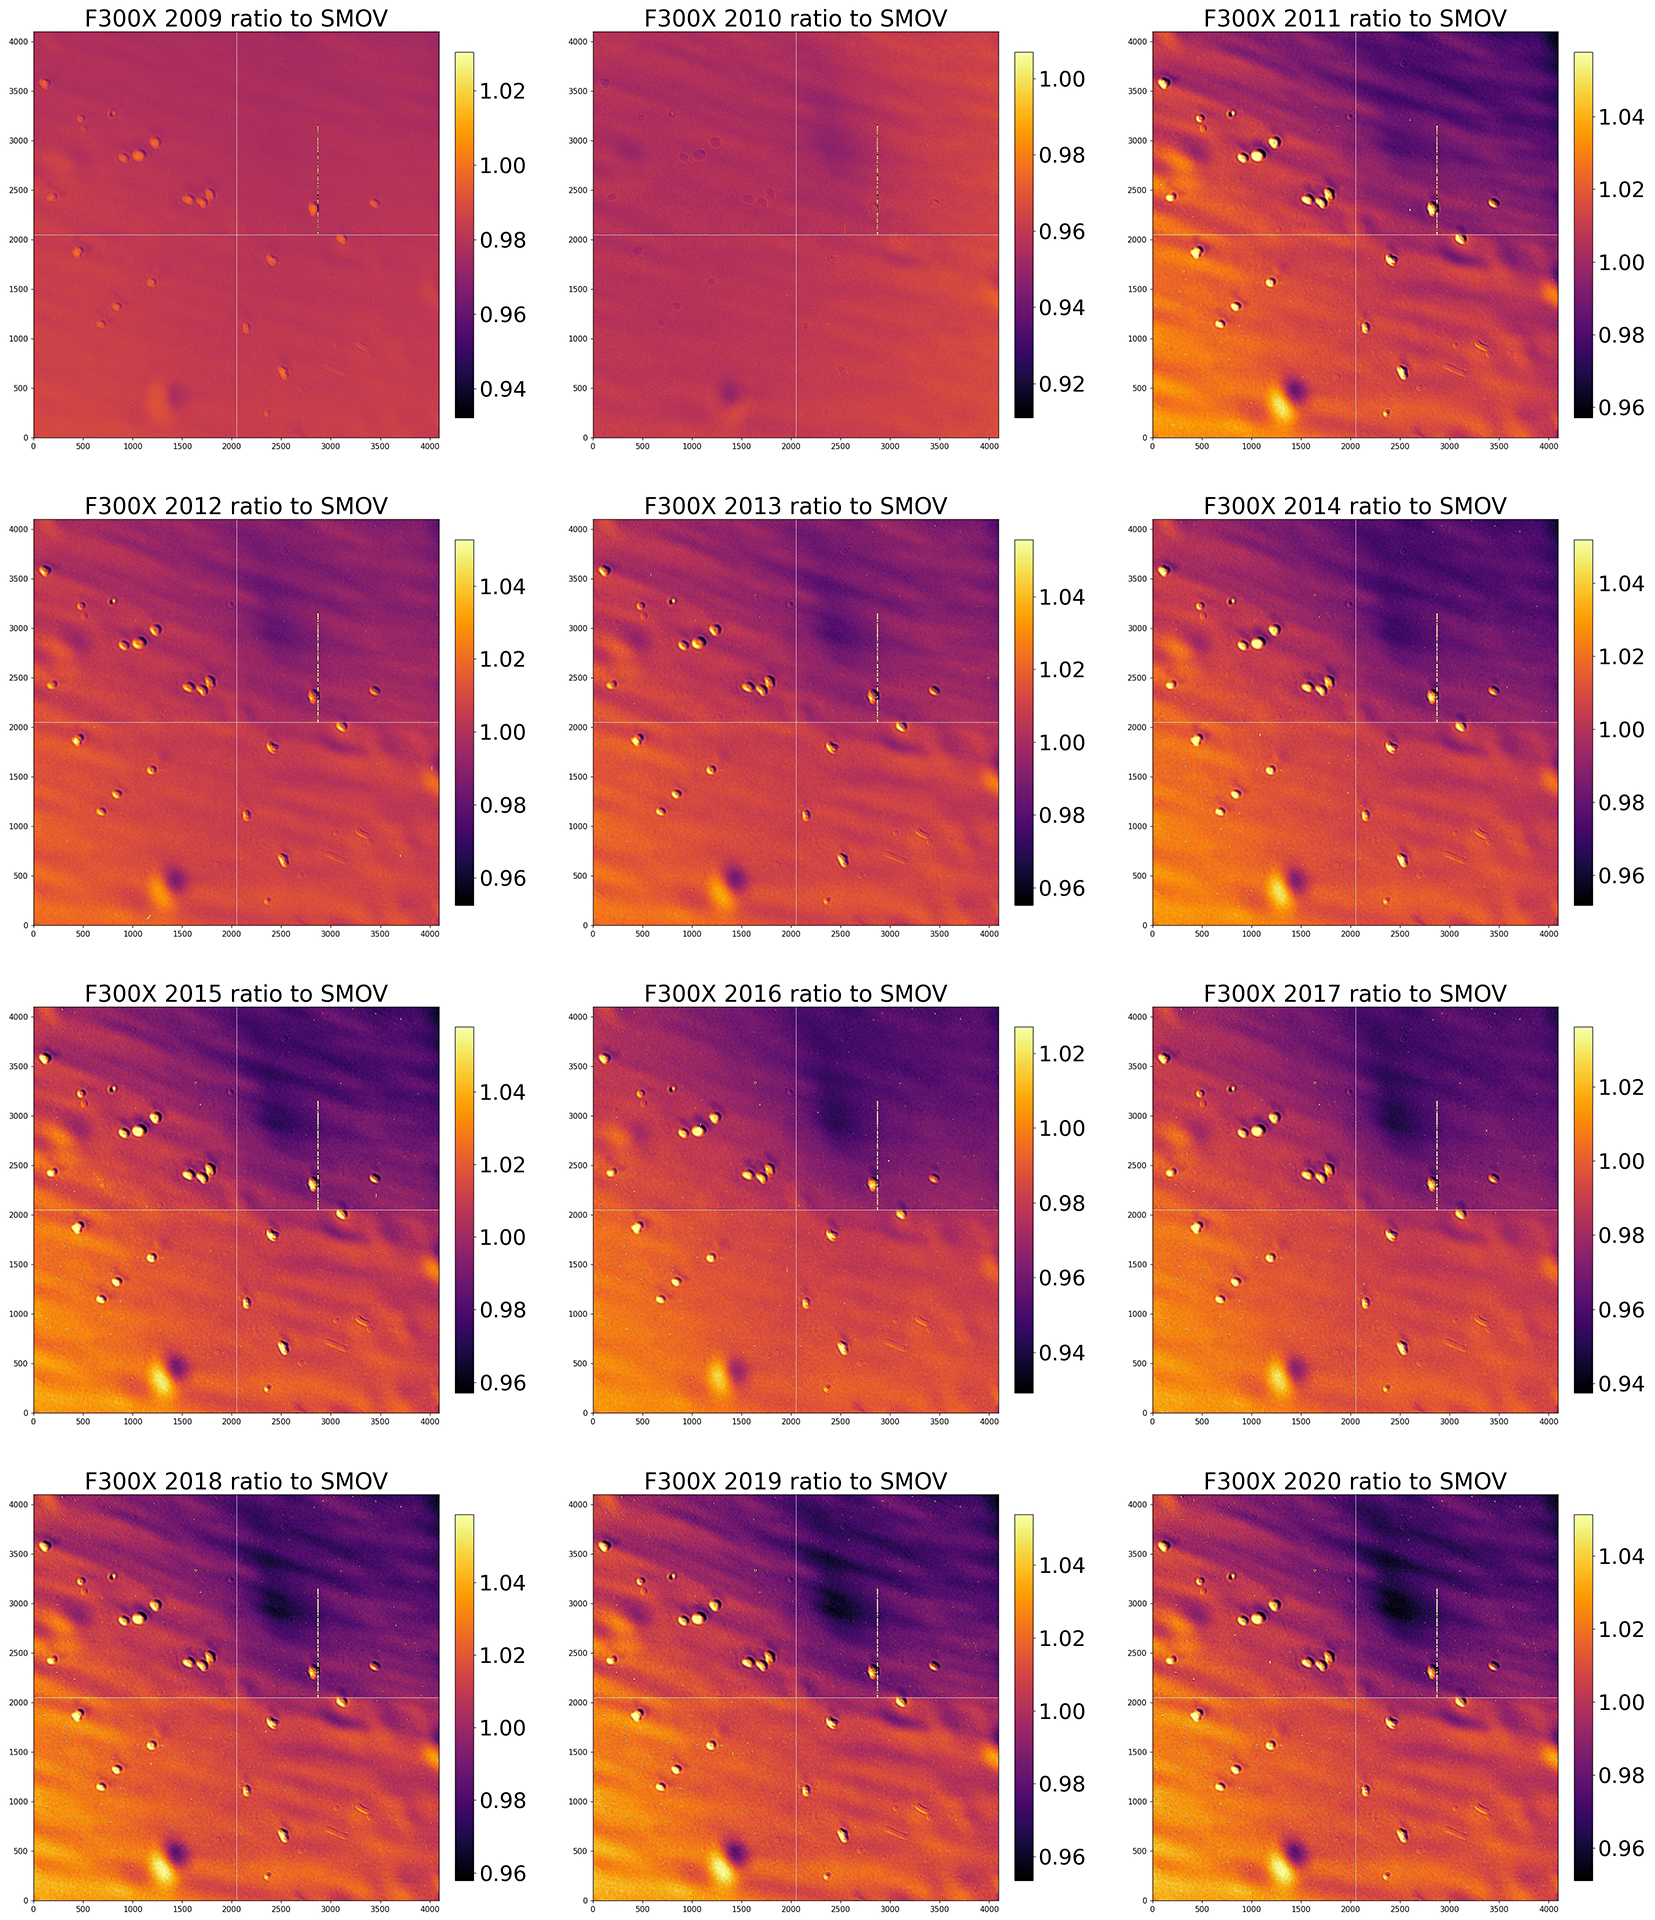 Caption for ratio mosaic:  Median combined deuterium lamp flat-field ratios normalized to SMOV for each year since WFC3 installation using a unique image scaling for each year. For presentation purposes each image has a thin white line plotted at x = 2048 and y = 2051 to separate the detector quadrants.